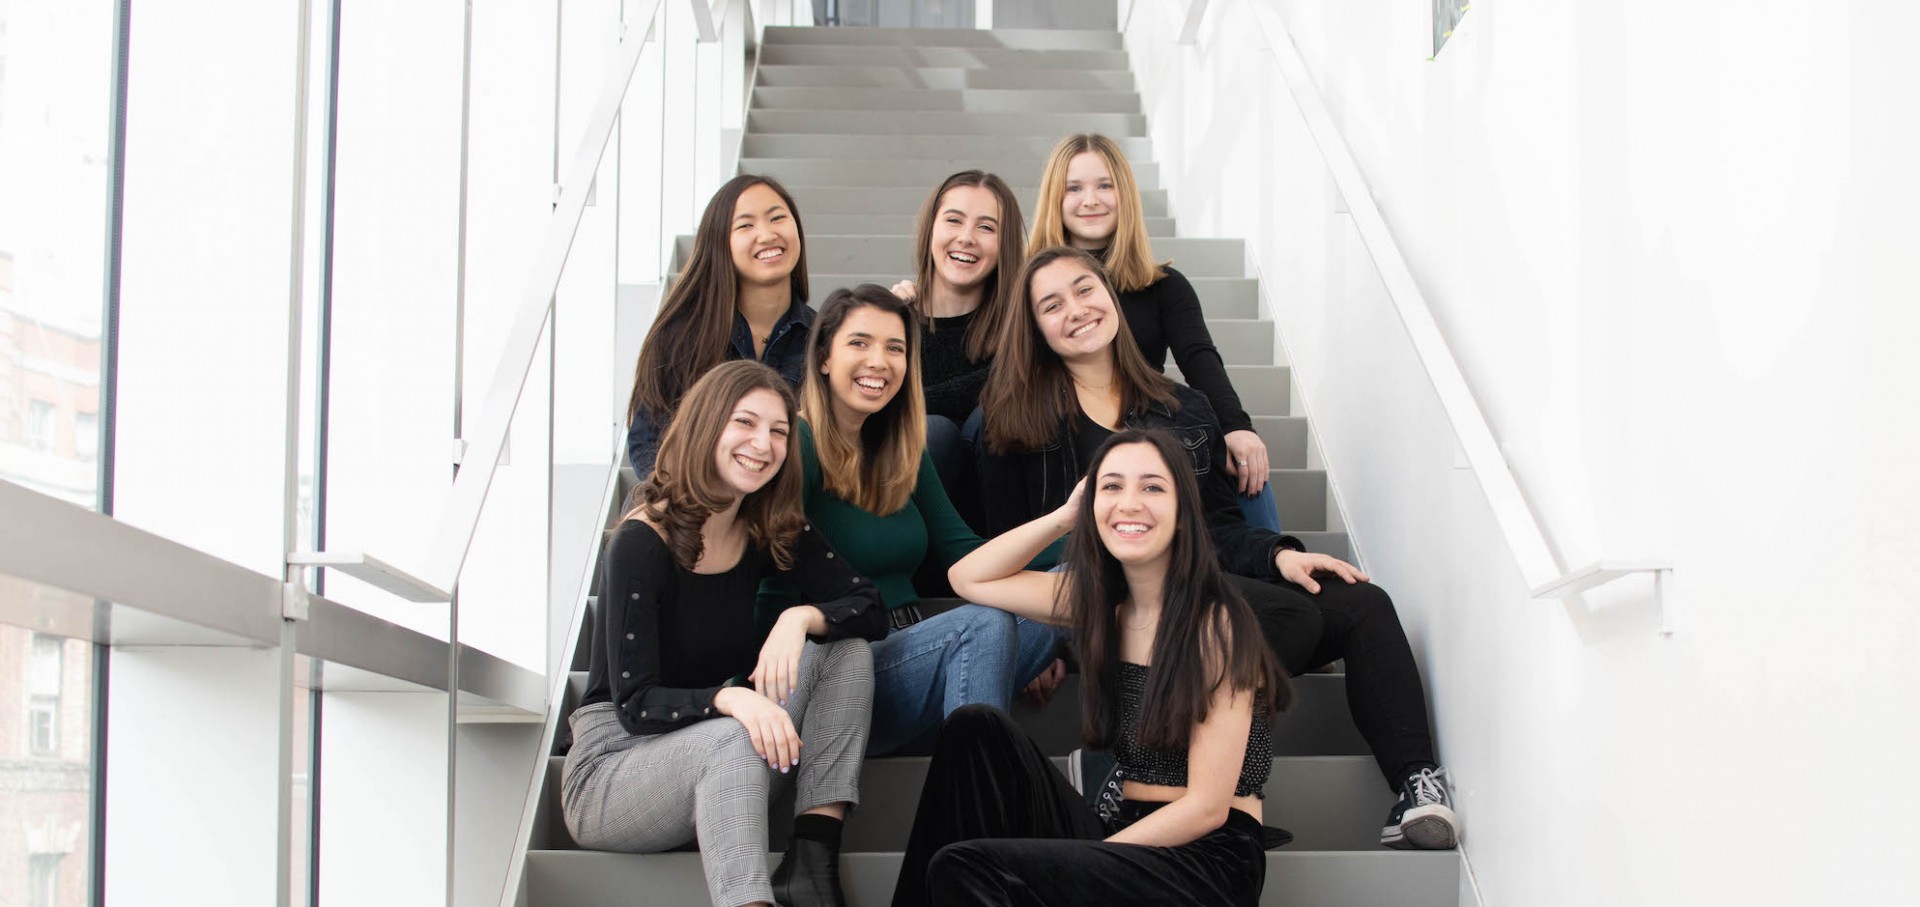 Members of Orchesis Board 2019 posing together on steps. 